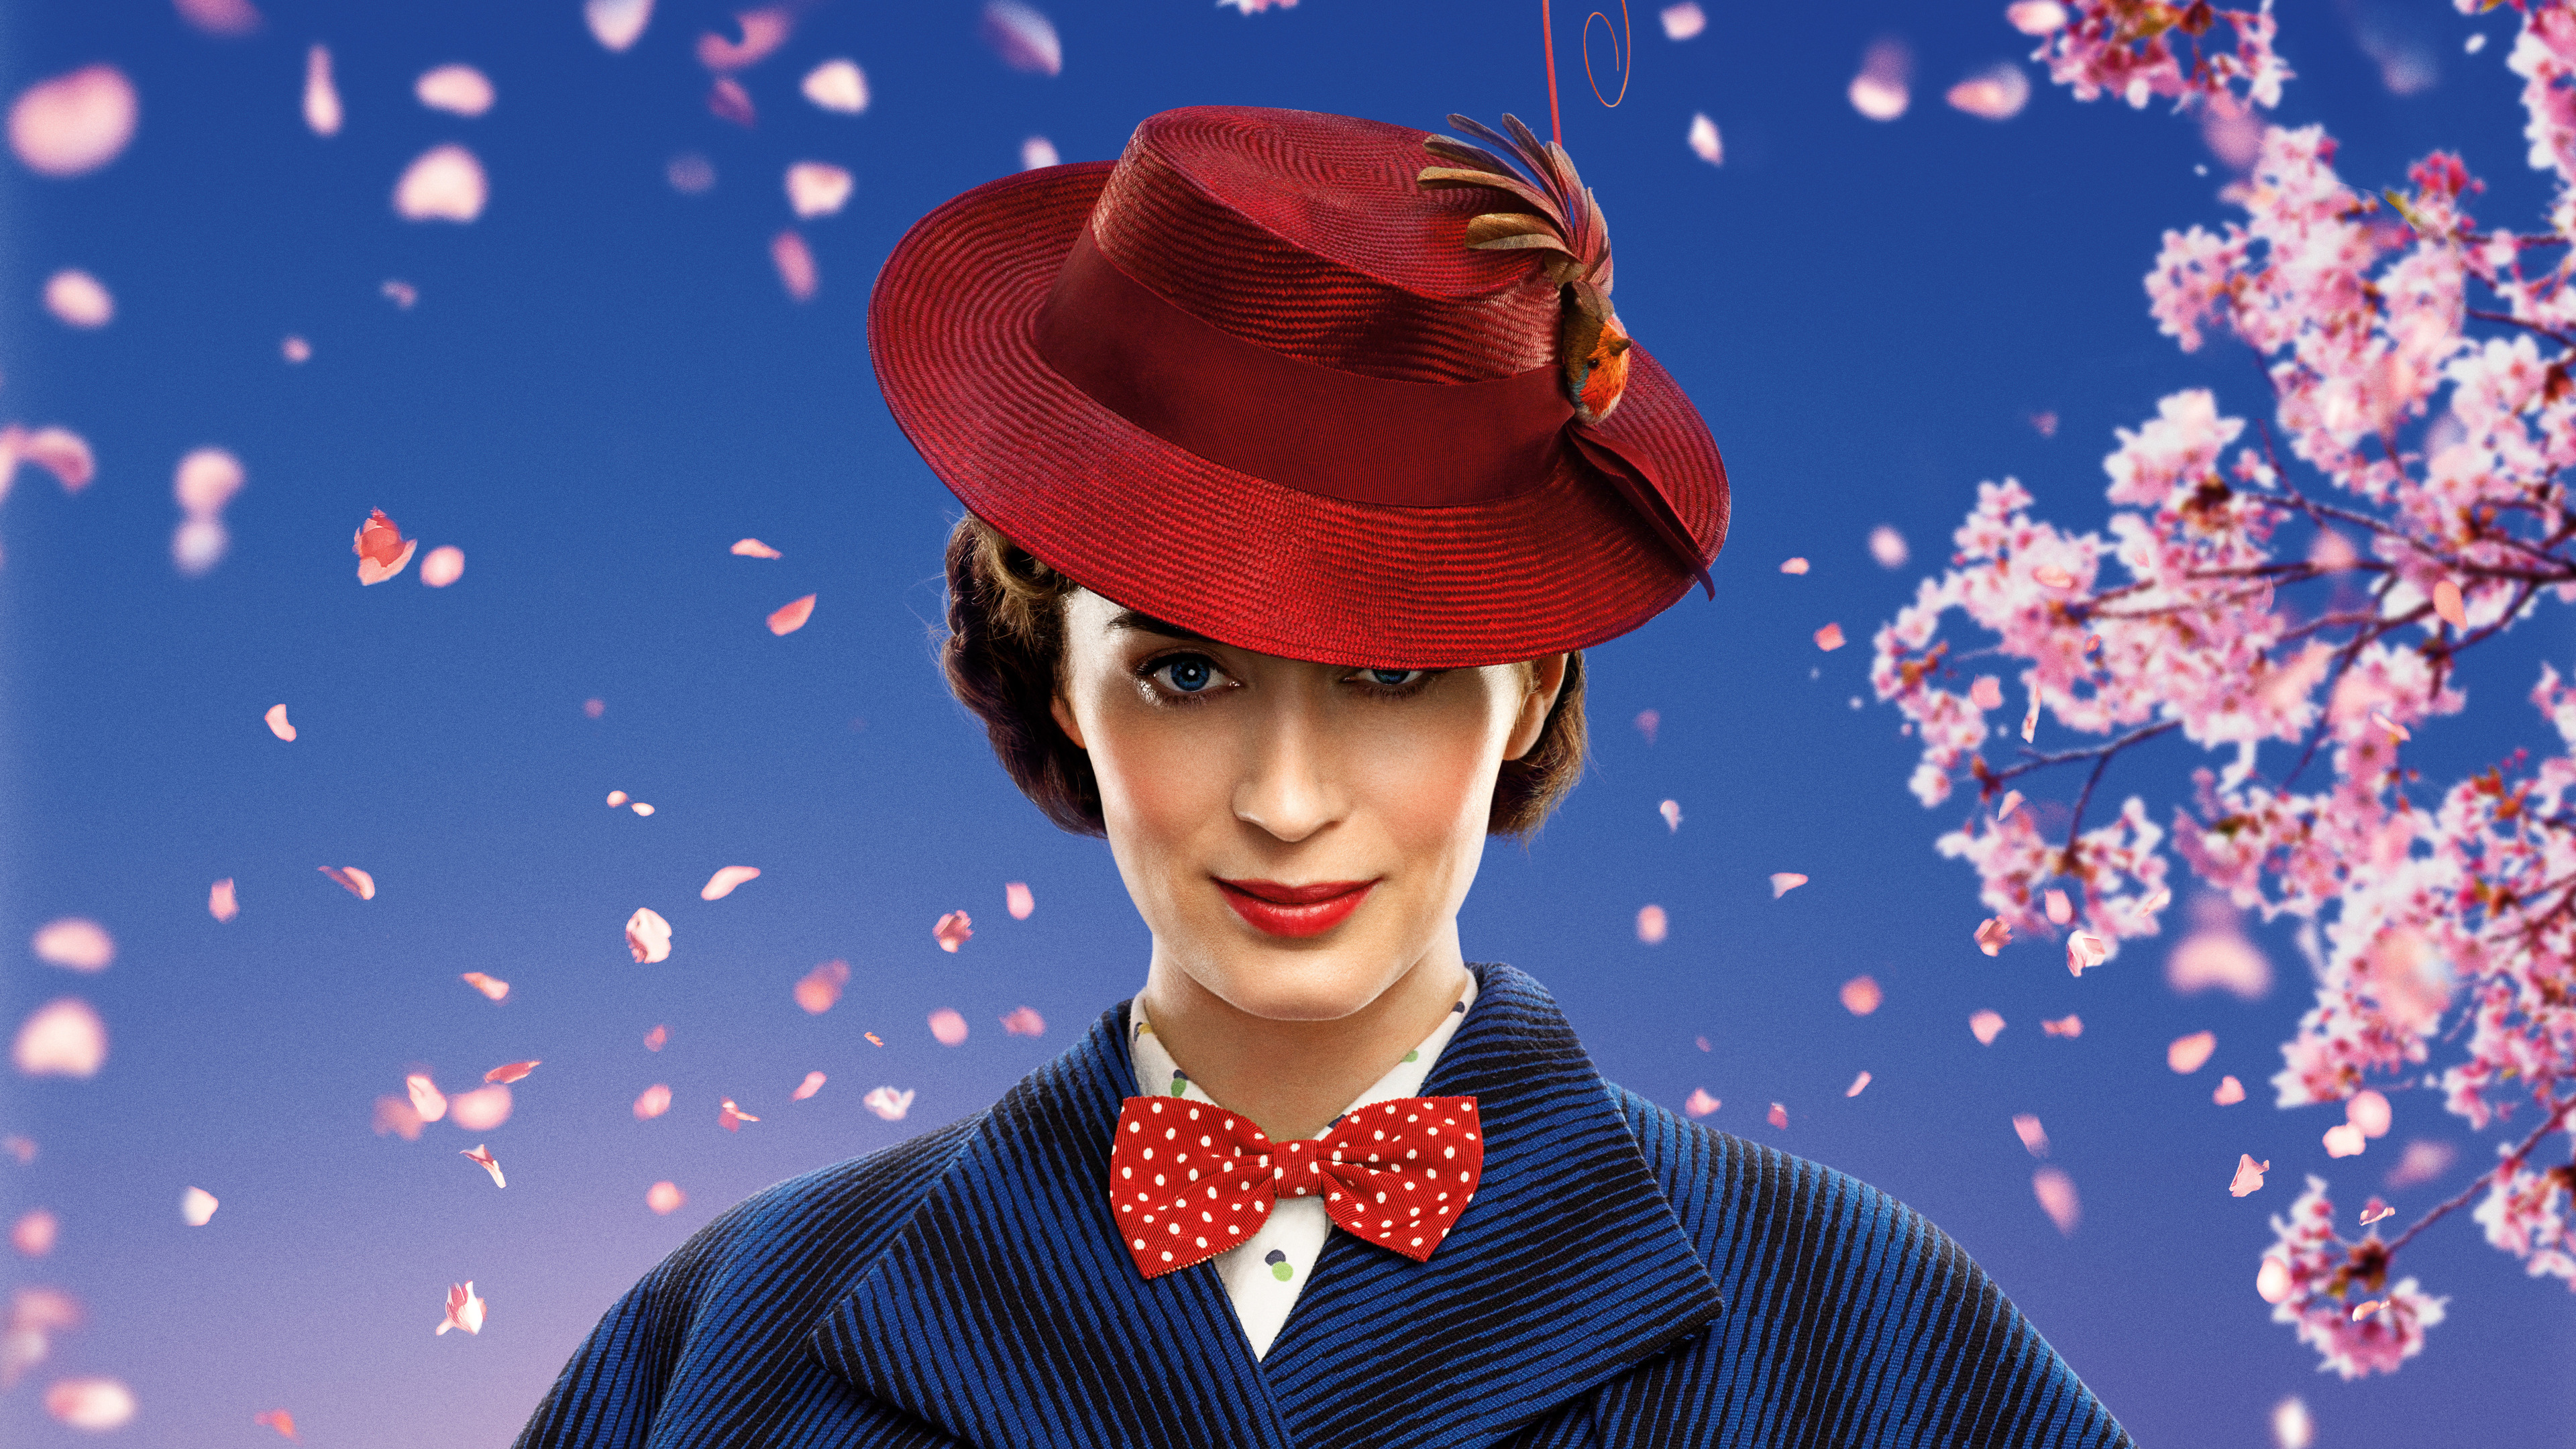 mary poppins returns 8k ultra hd wallpaper background on mary poppins wallpapers